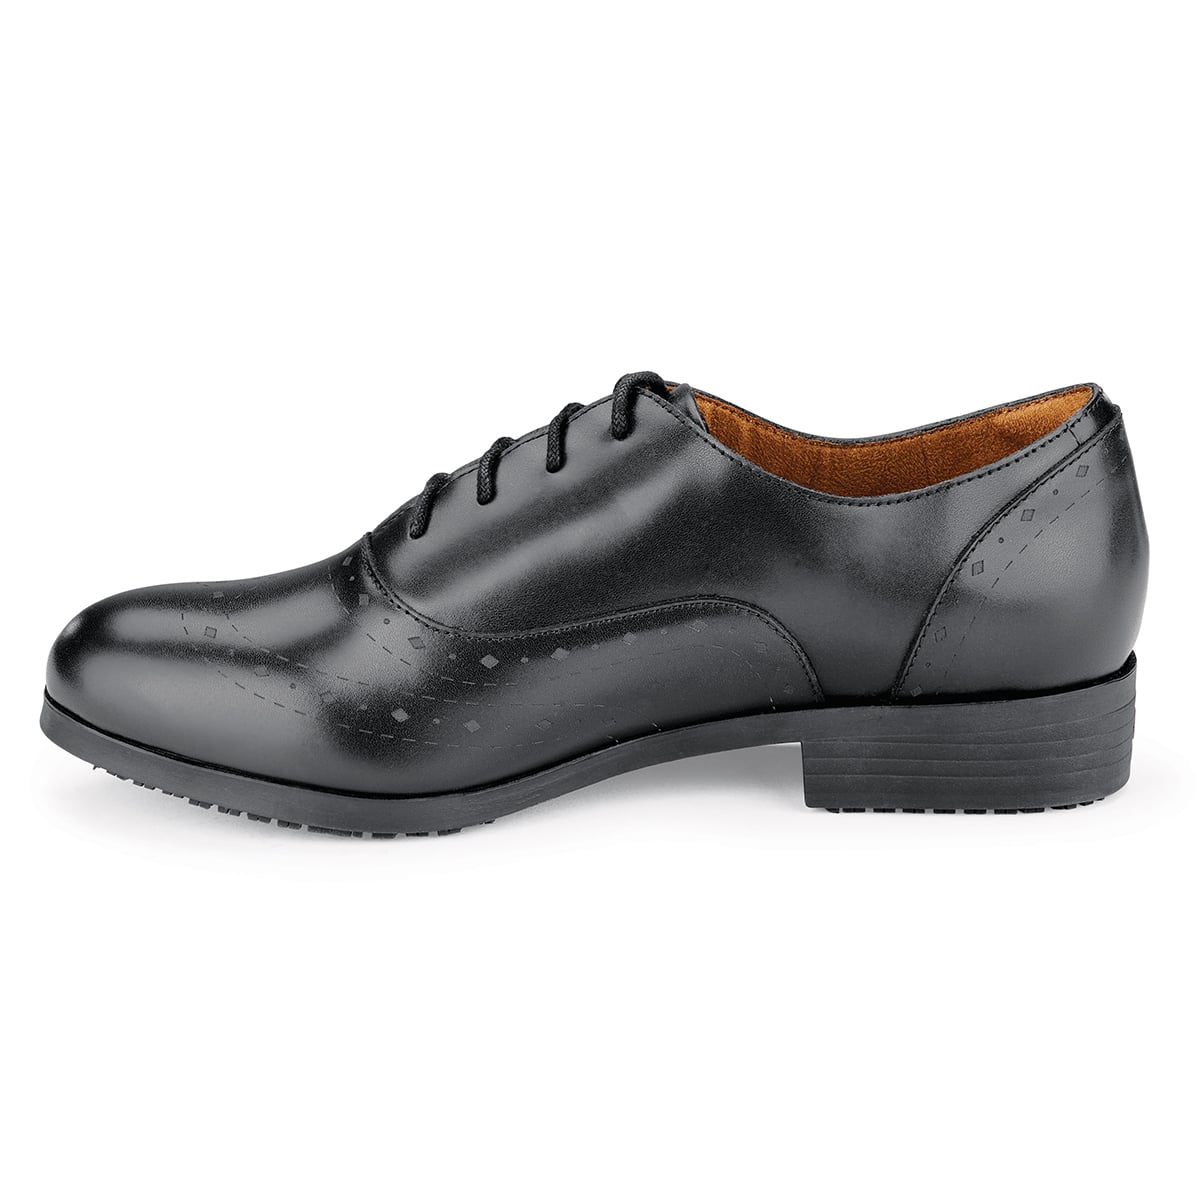 The Kora from Shoes For Crews are slip-resistant dress shoes, seen from the left.